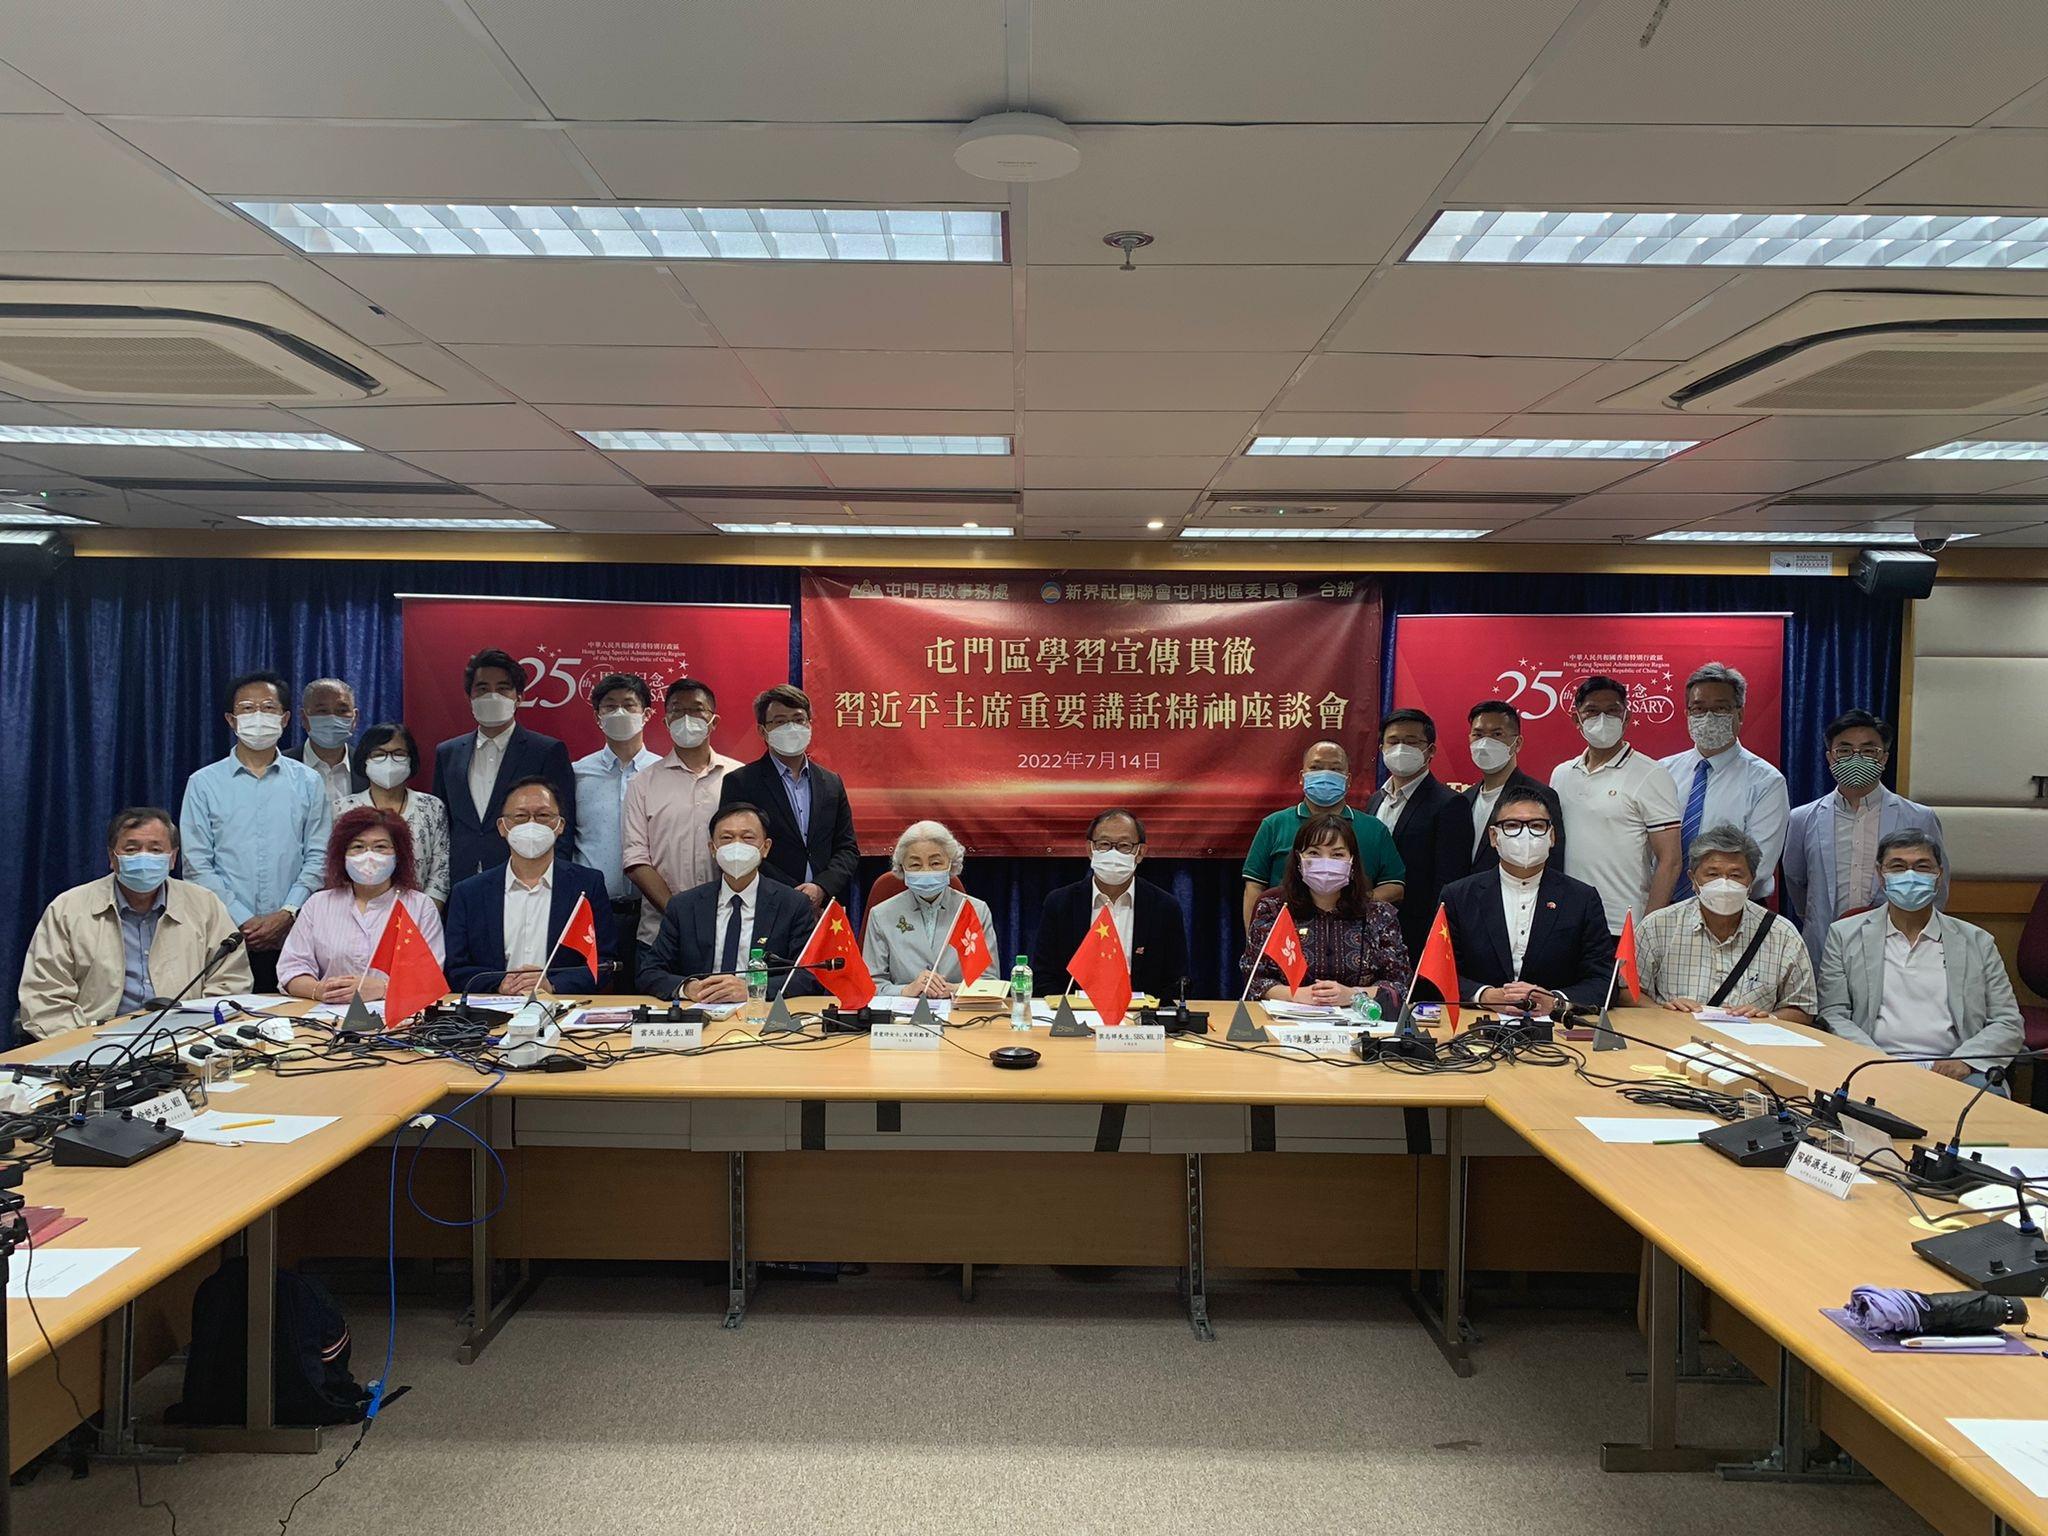 The Tuen Mun District Office, together with the New Territories Association of Societies (NTAS) Tuen Mun District Committee, held the "Session on Learn about, Promote and Implement the Spirit of President Xi's Important Speech" in the Tuen Mun District Council conference room today (July 14) . Photo shows the former Vice-Chairperson of the Hong Kong Special Administrative Region Basic Law Committee of the Standing Committee of the National People's Congress Ms Elsie Leung (first row, fifth left), as well as member of the National Committee of the Chinese People's Political Consultative Conference and the Chairman of the NTAS, Mr Leung Che-cheung (first row, fifth right), the District Officer (Tuen Mun) Ms Aubrey Fung (first row, fourth right) and the chairman of the NTAS Tuen Mun District Committee Mr Wan Tin-chong (first row, fourth left) together with other guests and participants at the session.